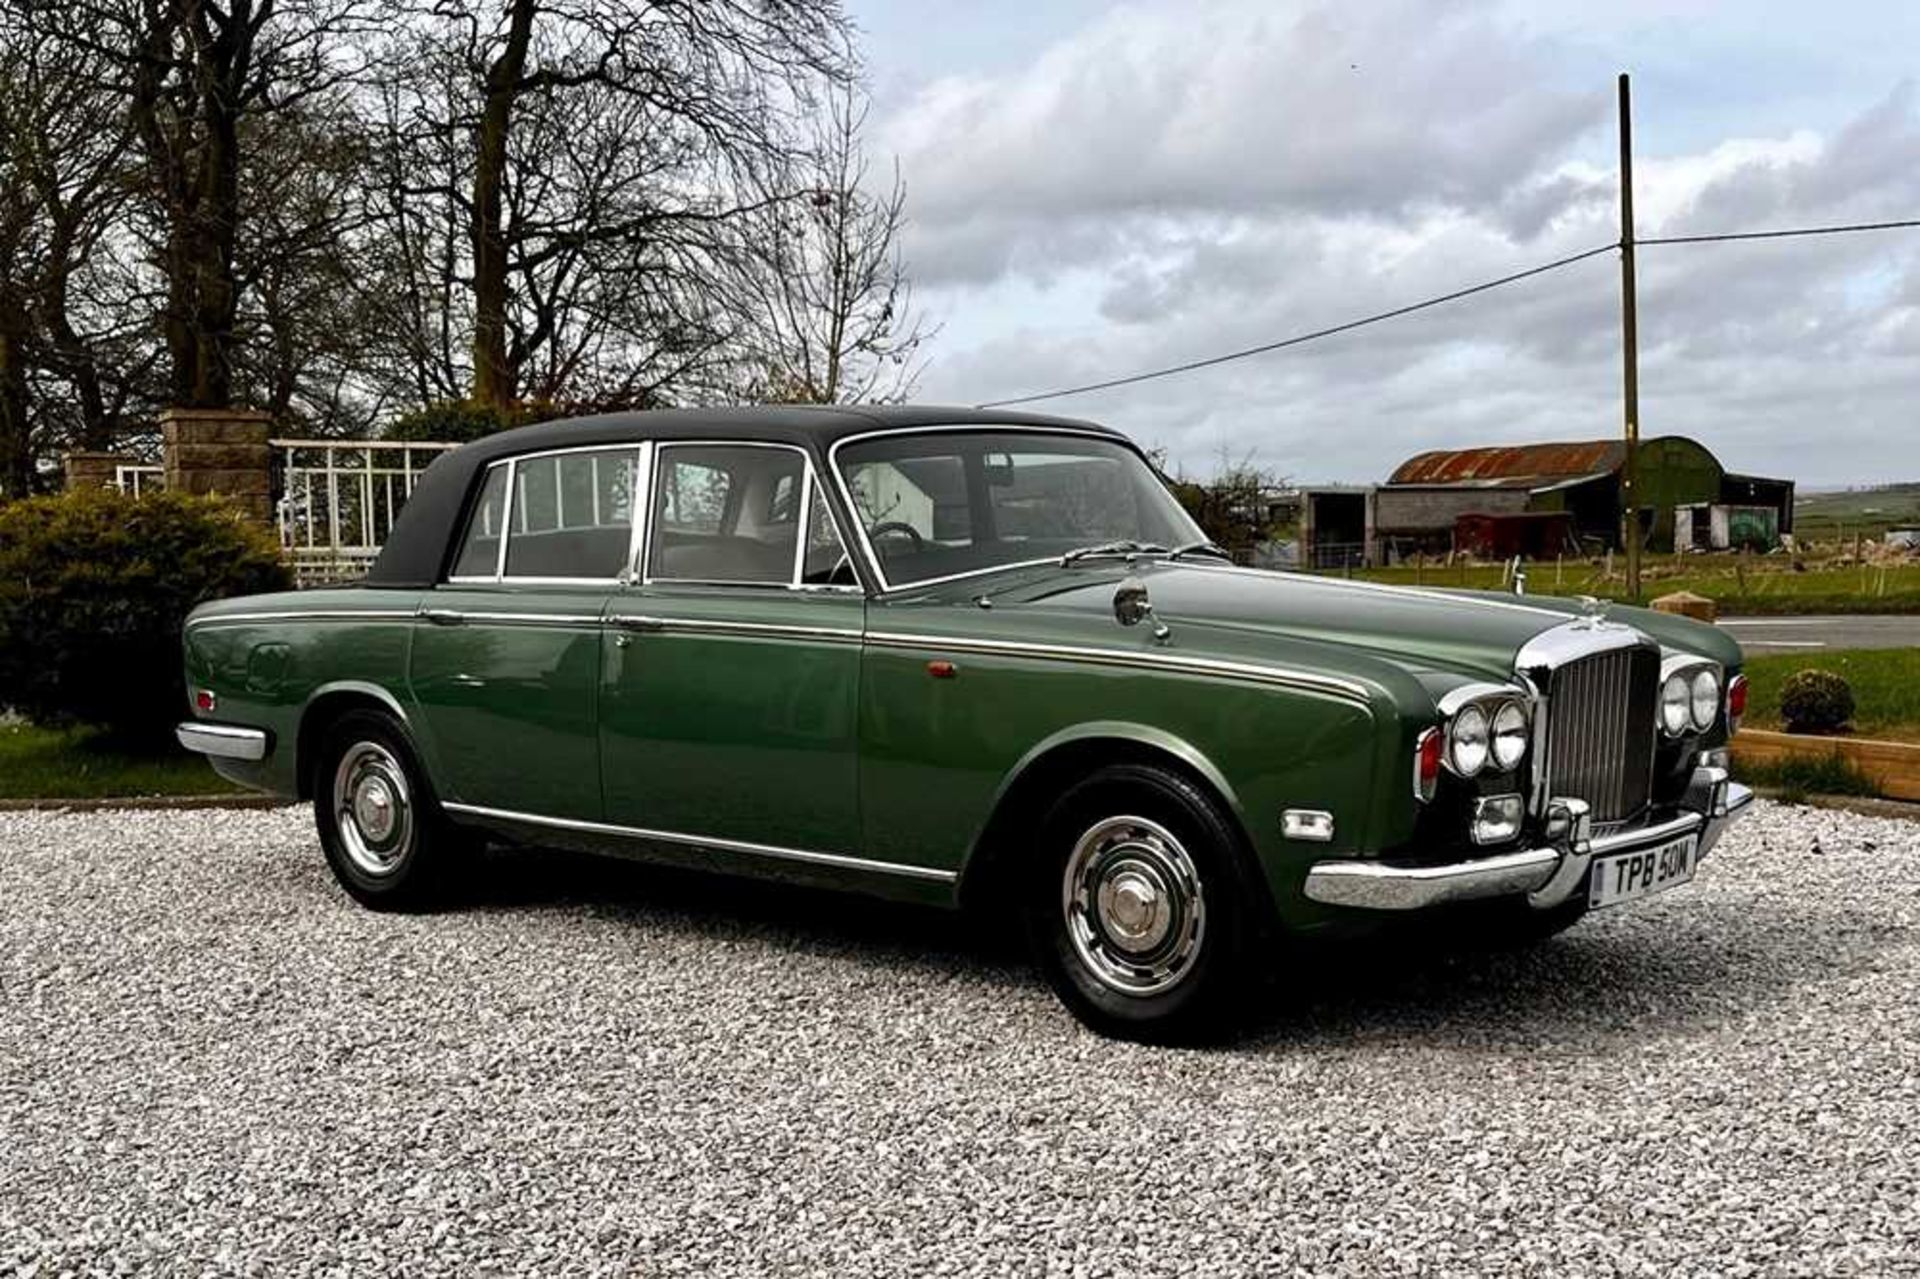 1973 Bentley T-Series Saloon Formerly part of the Dr James Hull and Jaguar Land Rover collections - Image 4 of 22